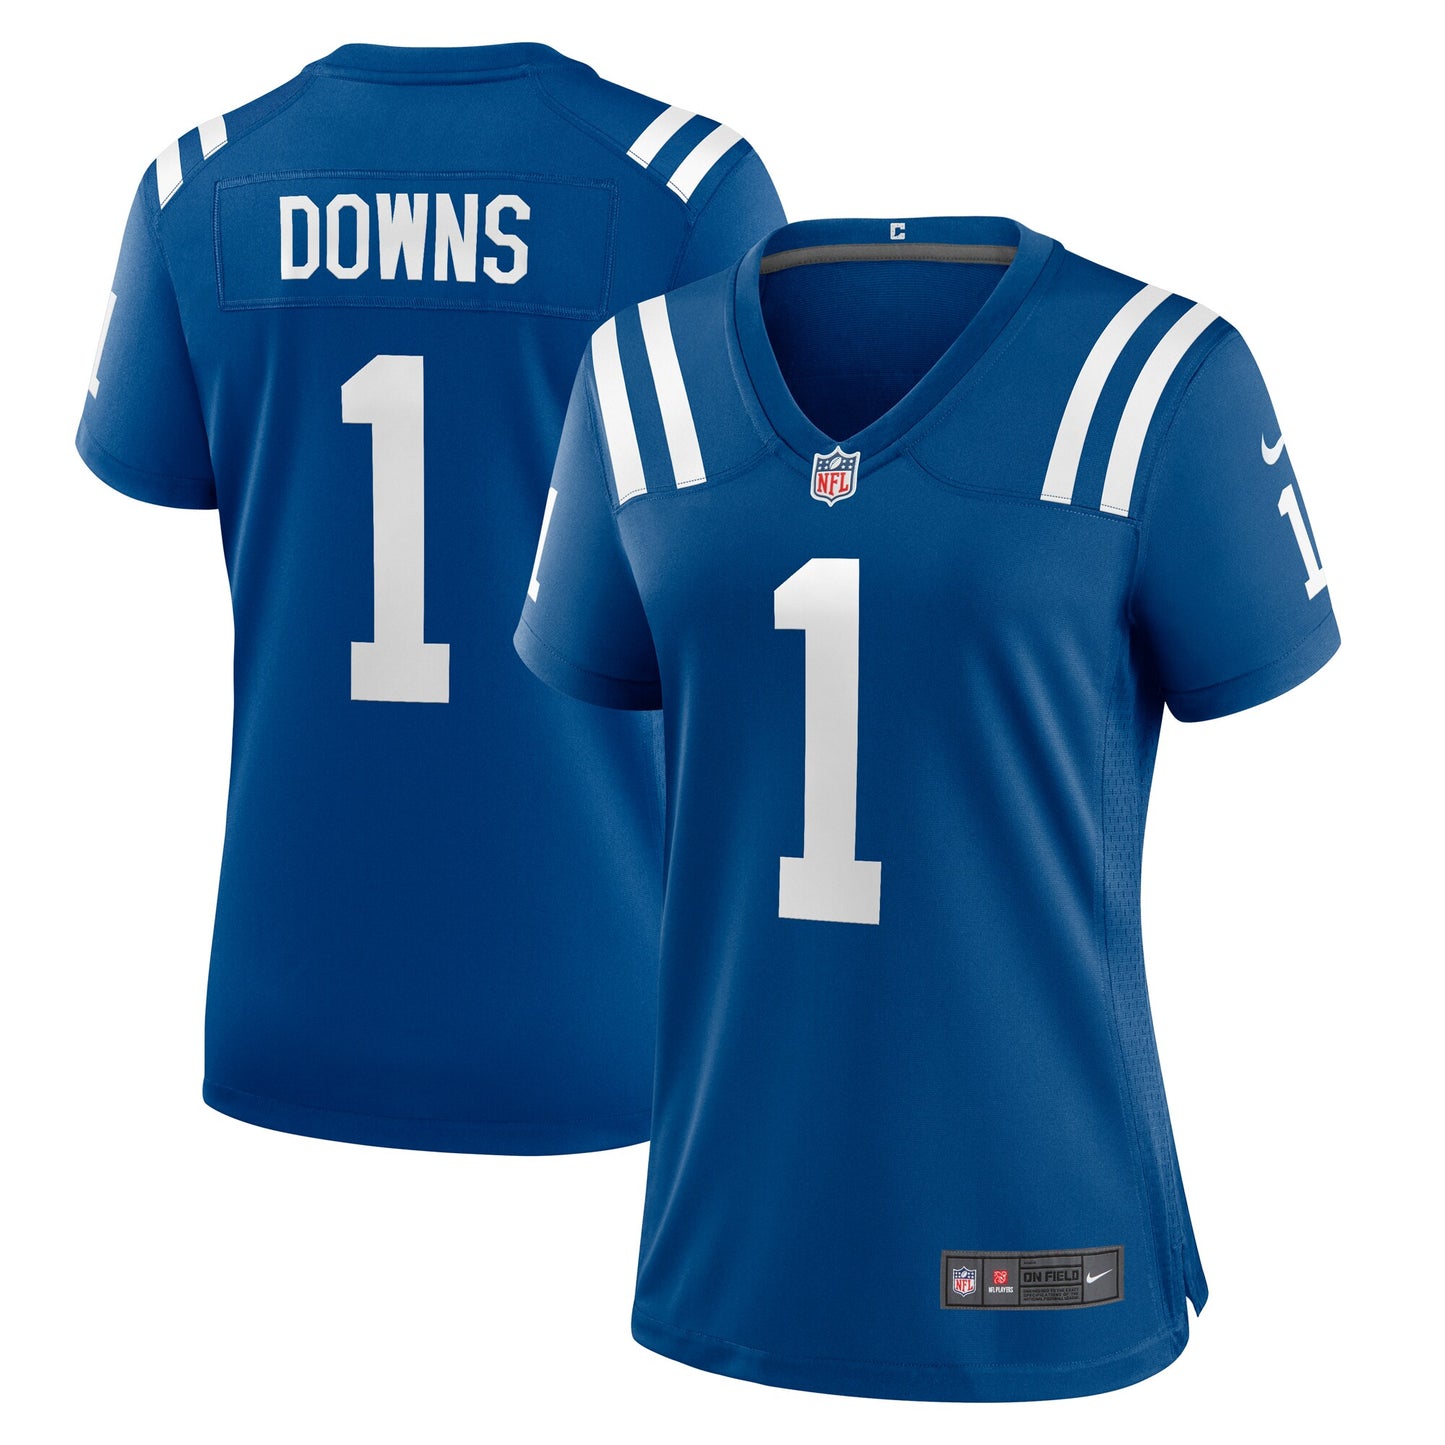 Josh Downs Indianapolis Colts Nike Women's Team Game Jersey - Royal